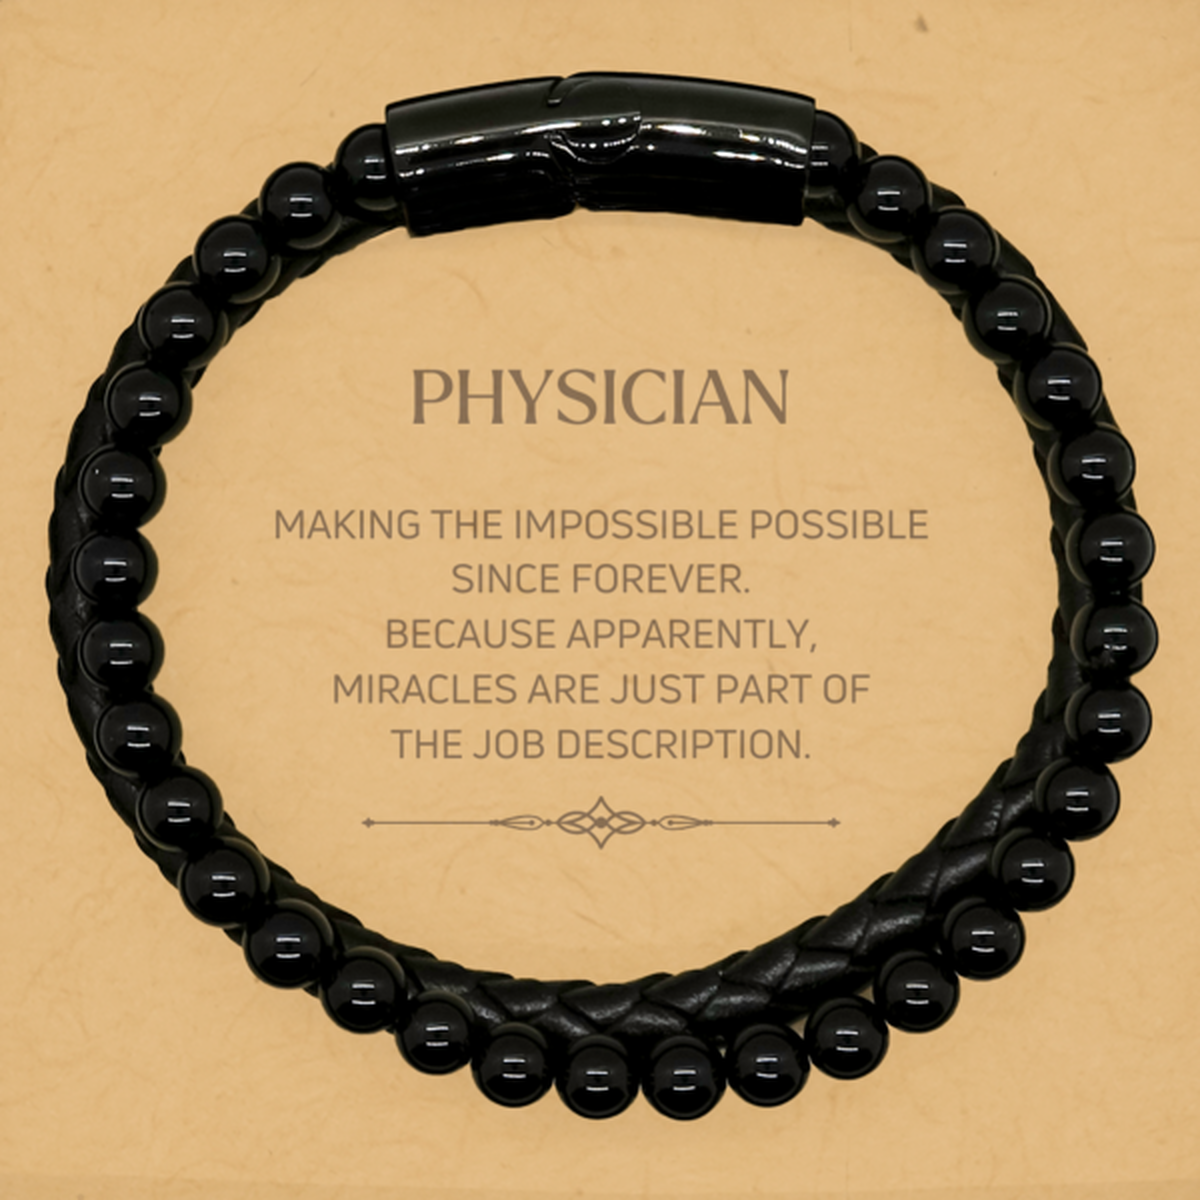 Funny Physician Gifts, Miracles are just part of the job description, Inspirational Birthday Stone Leather Bracelets For Physician, Men, Women, Coworkers, Friends, Boss